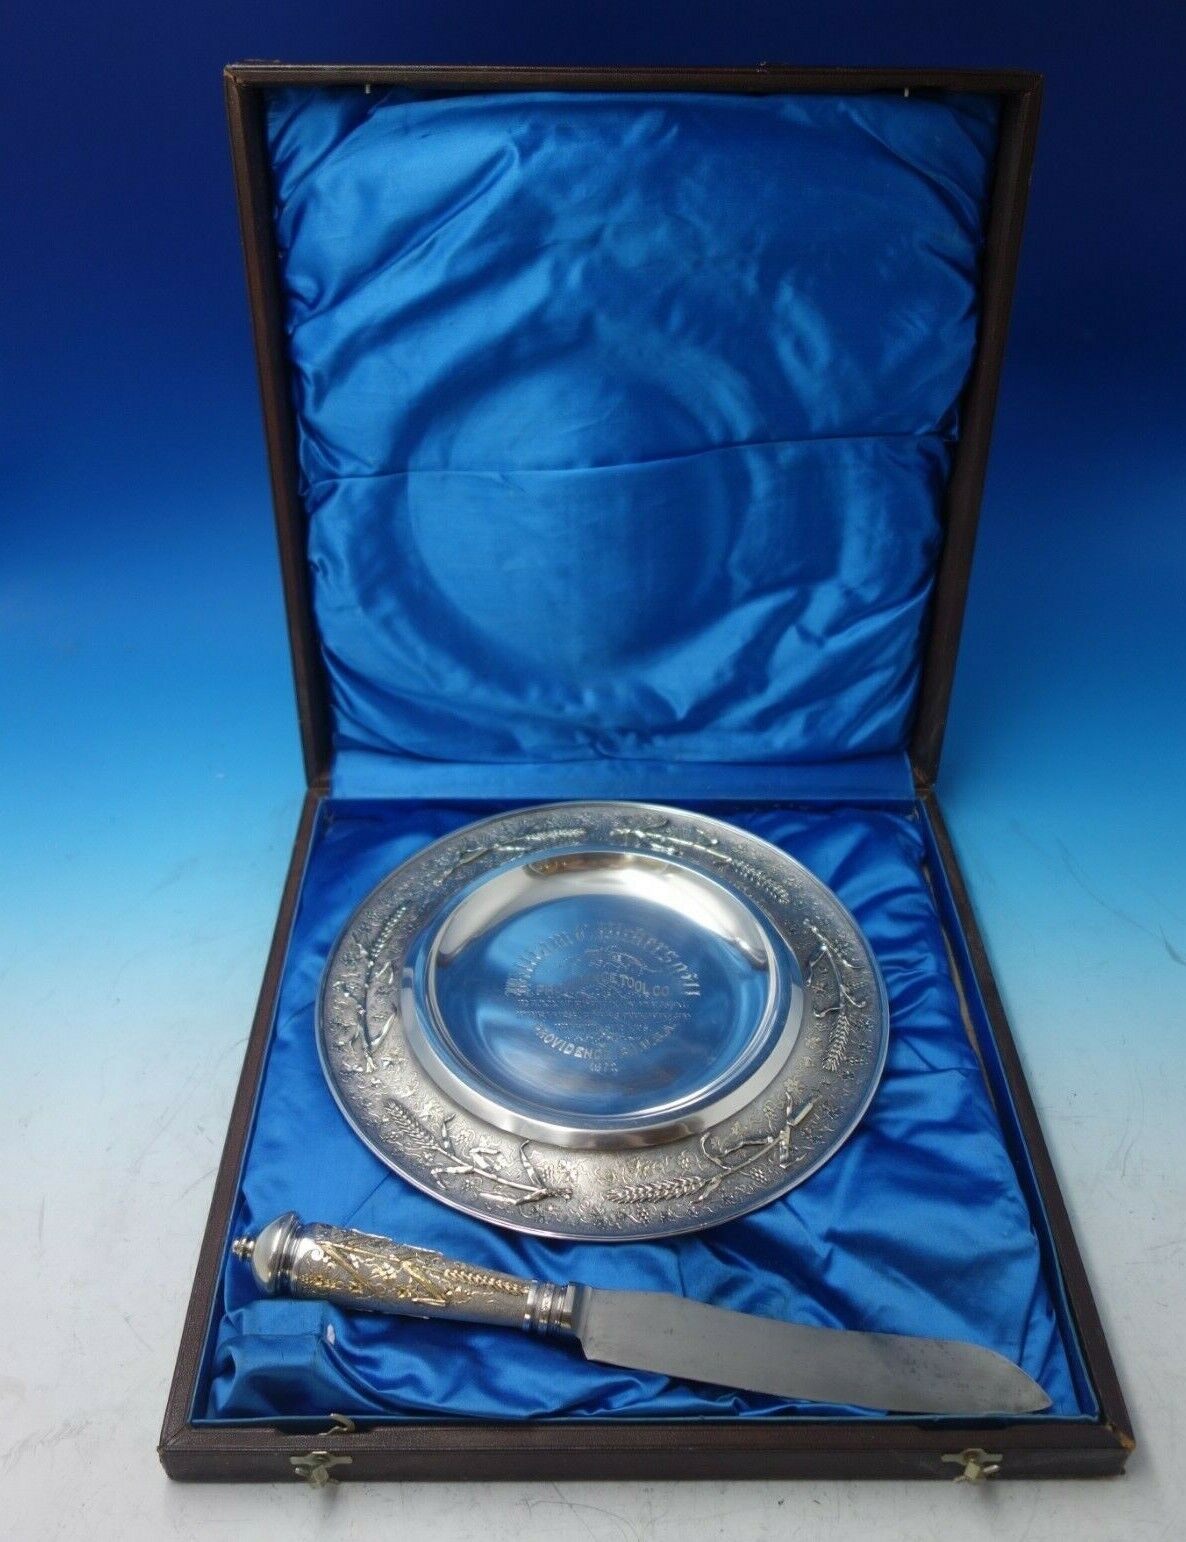 Judaica by Gorham Sterling Silver Challah Set 2pc Fitted Box #20 Date 1872 #6046